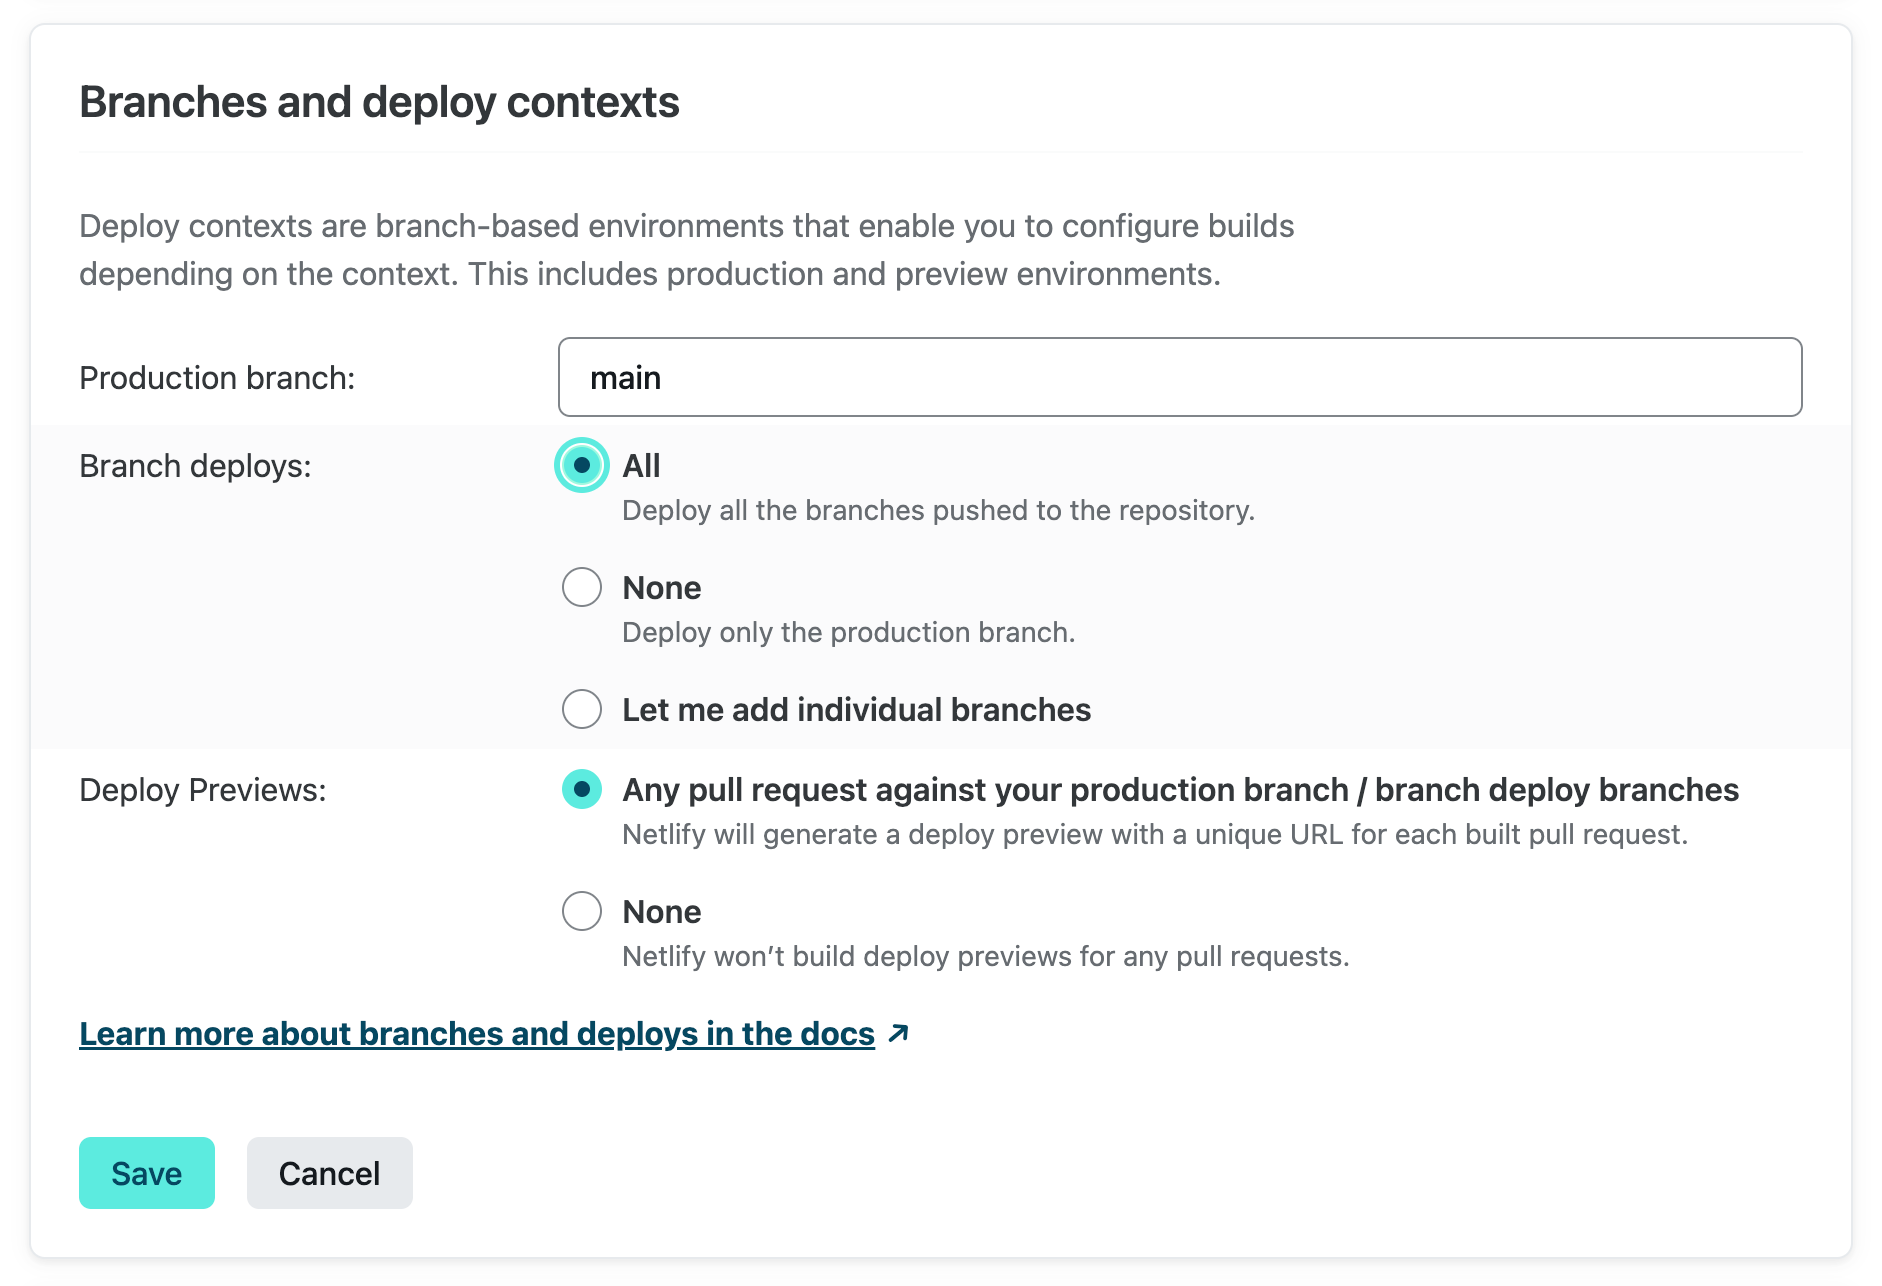 Settings for branch deploys by deploy context